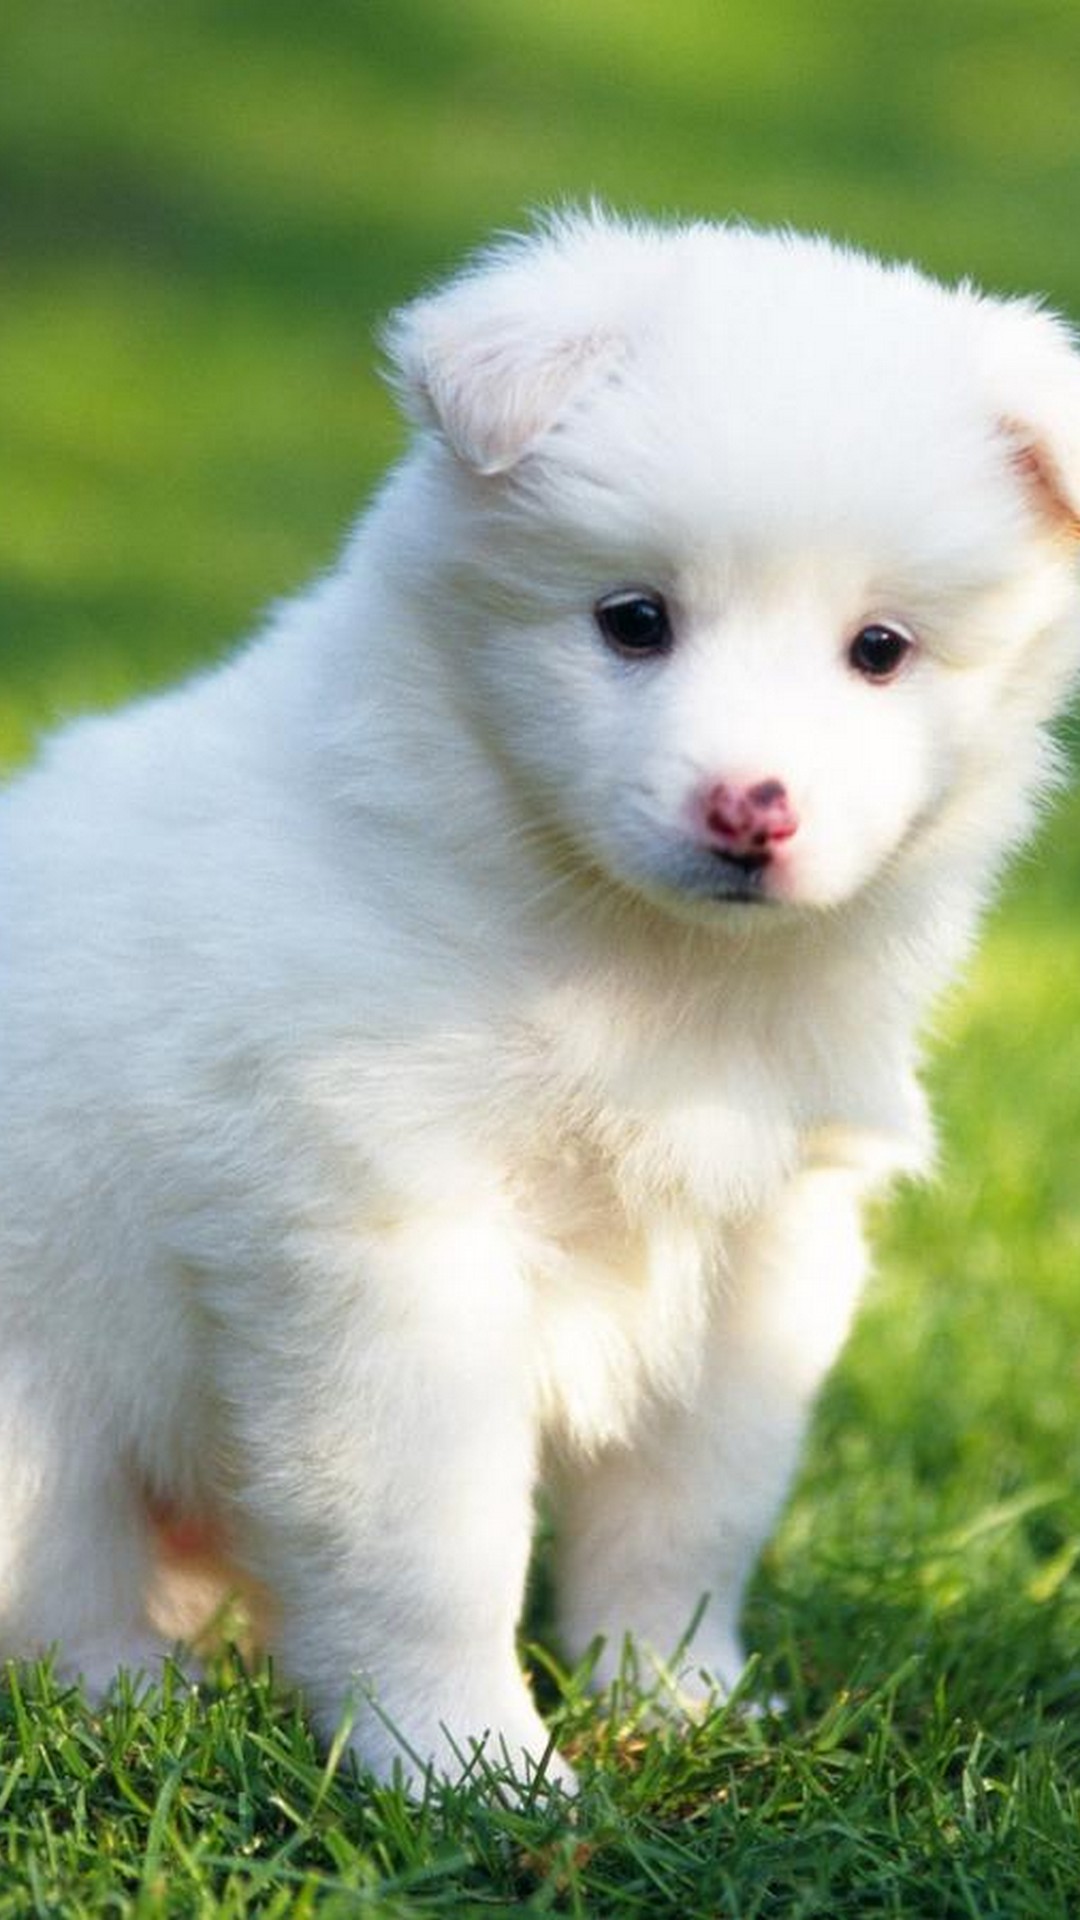 Funny Puppies Wallpaper Android with HD resolution 1080x1920